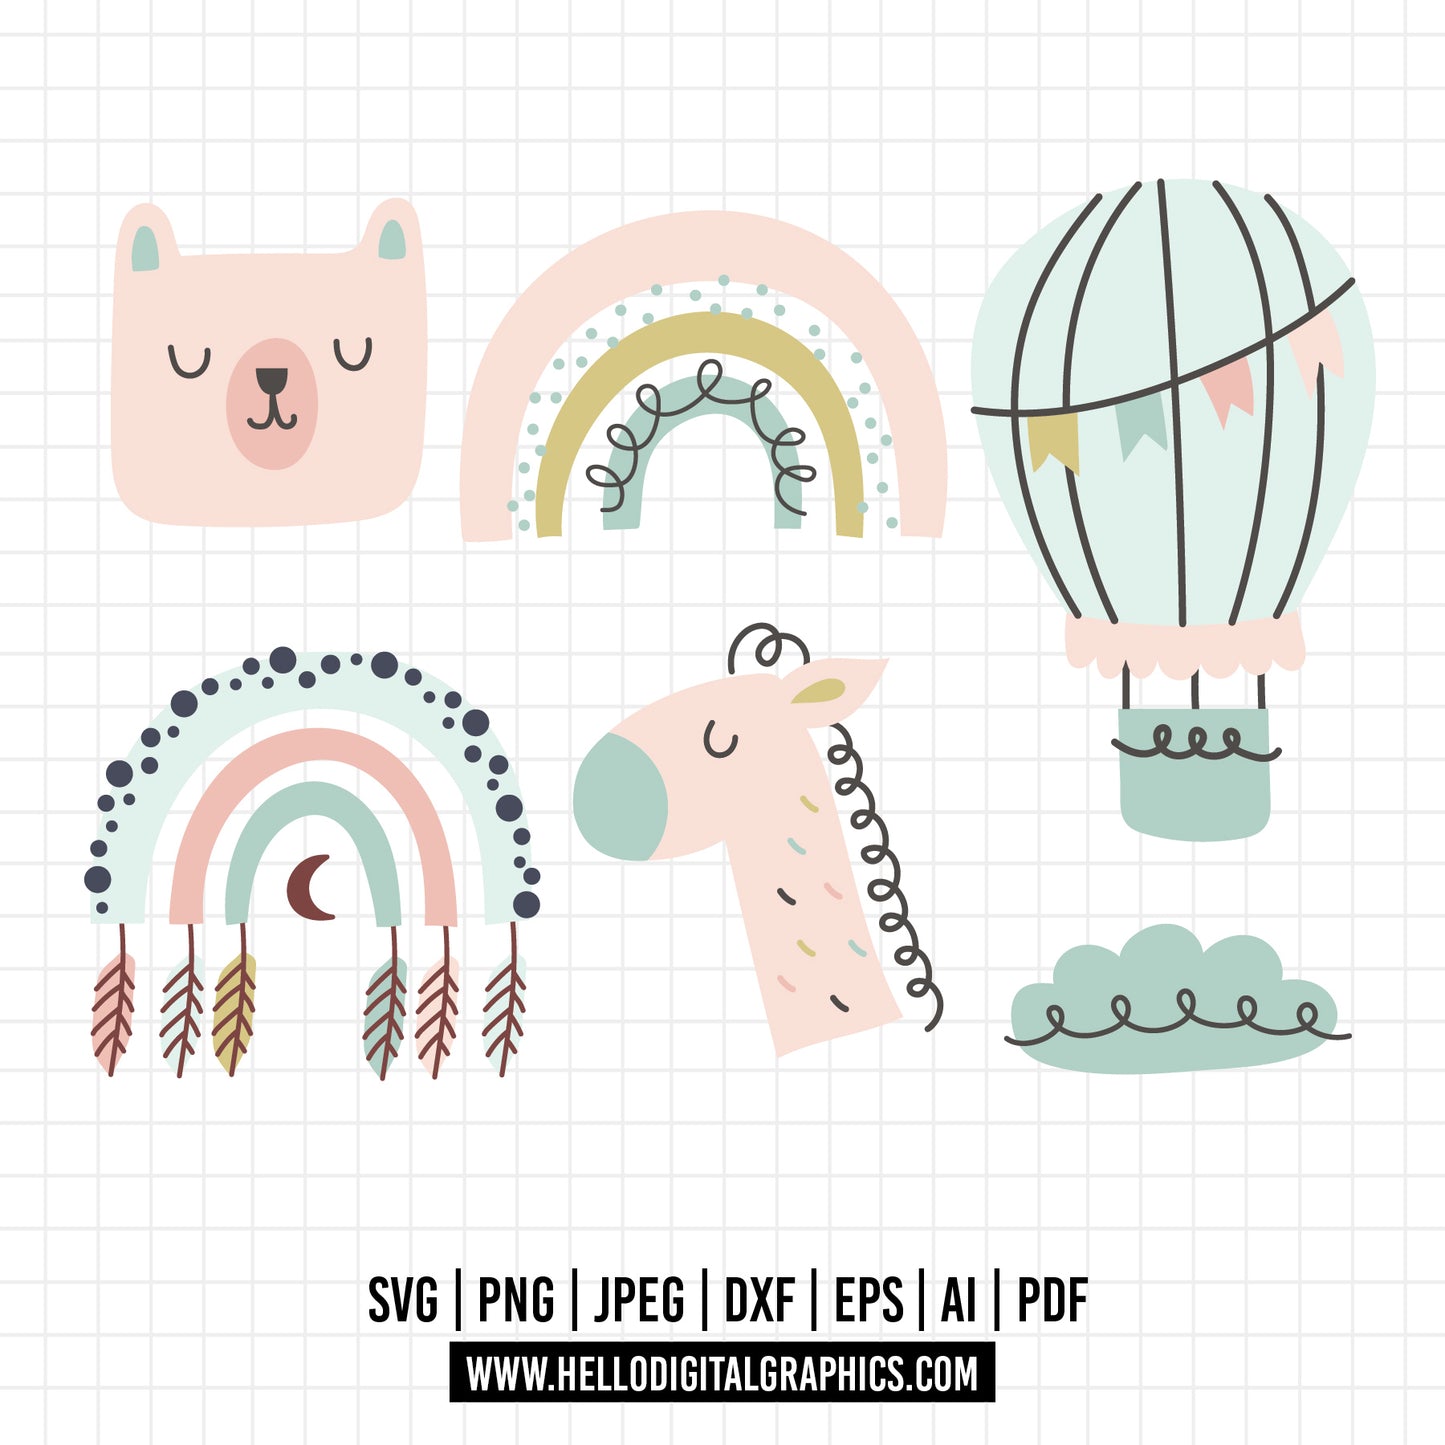 COD941 Baby svg, baby doodle svg, baby png, baby clipart, unicorn baby svg